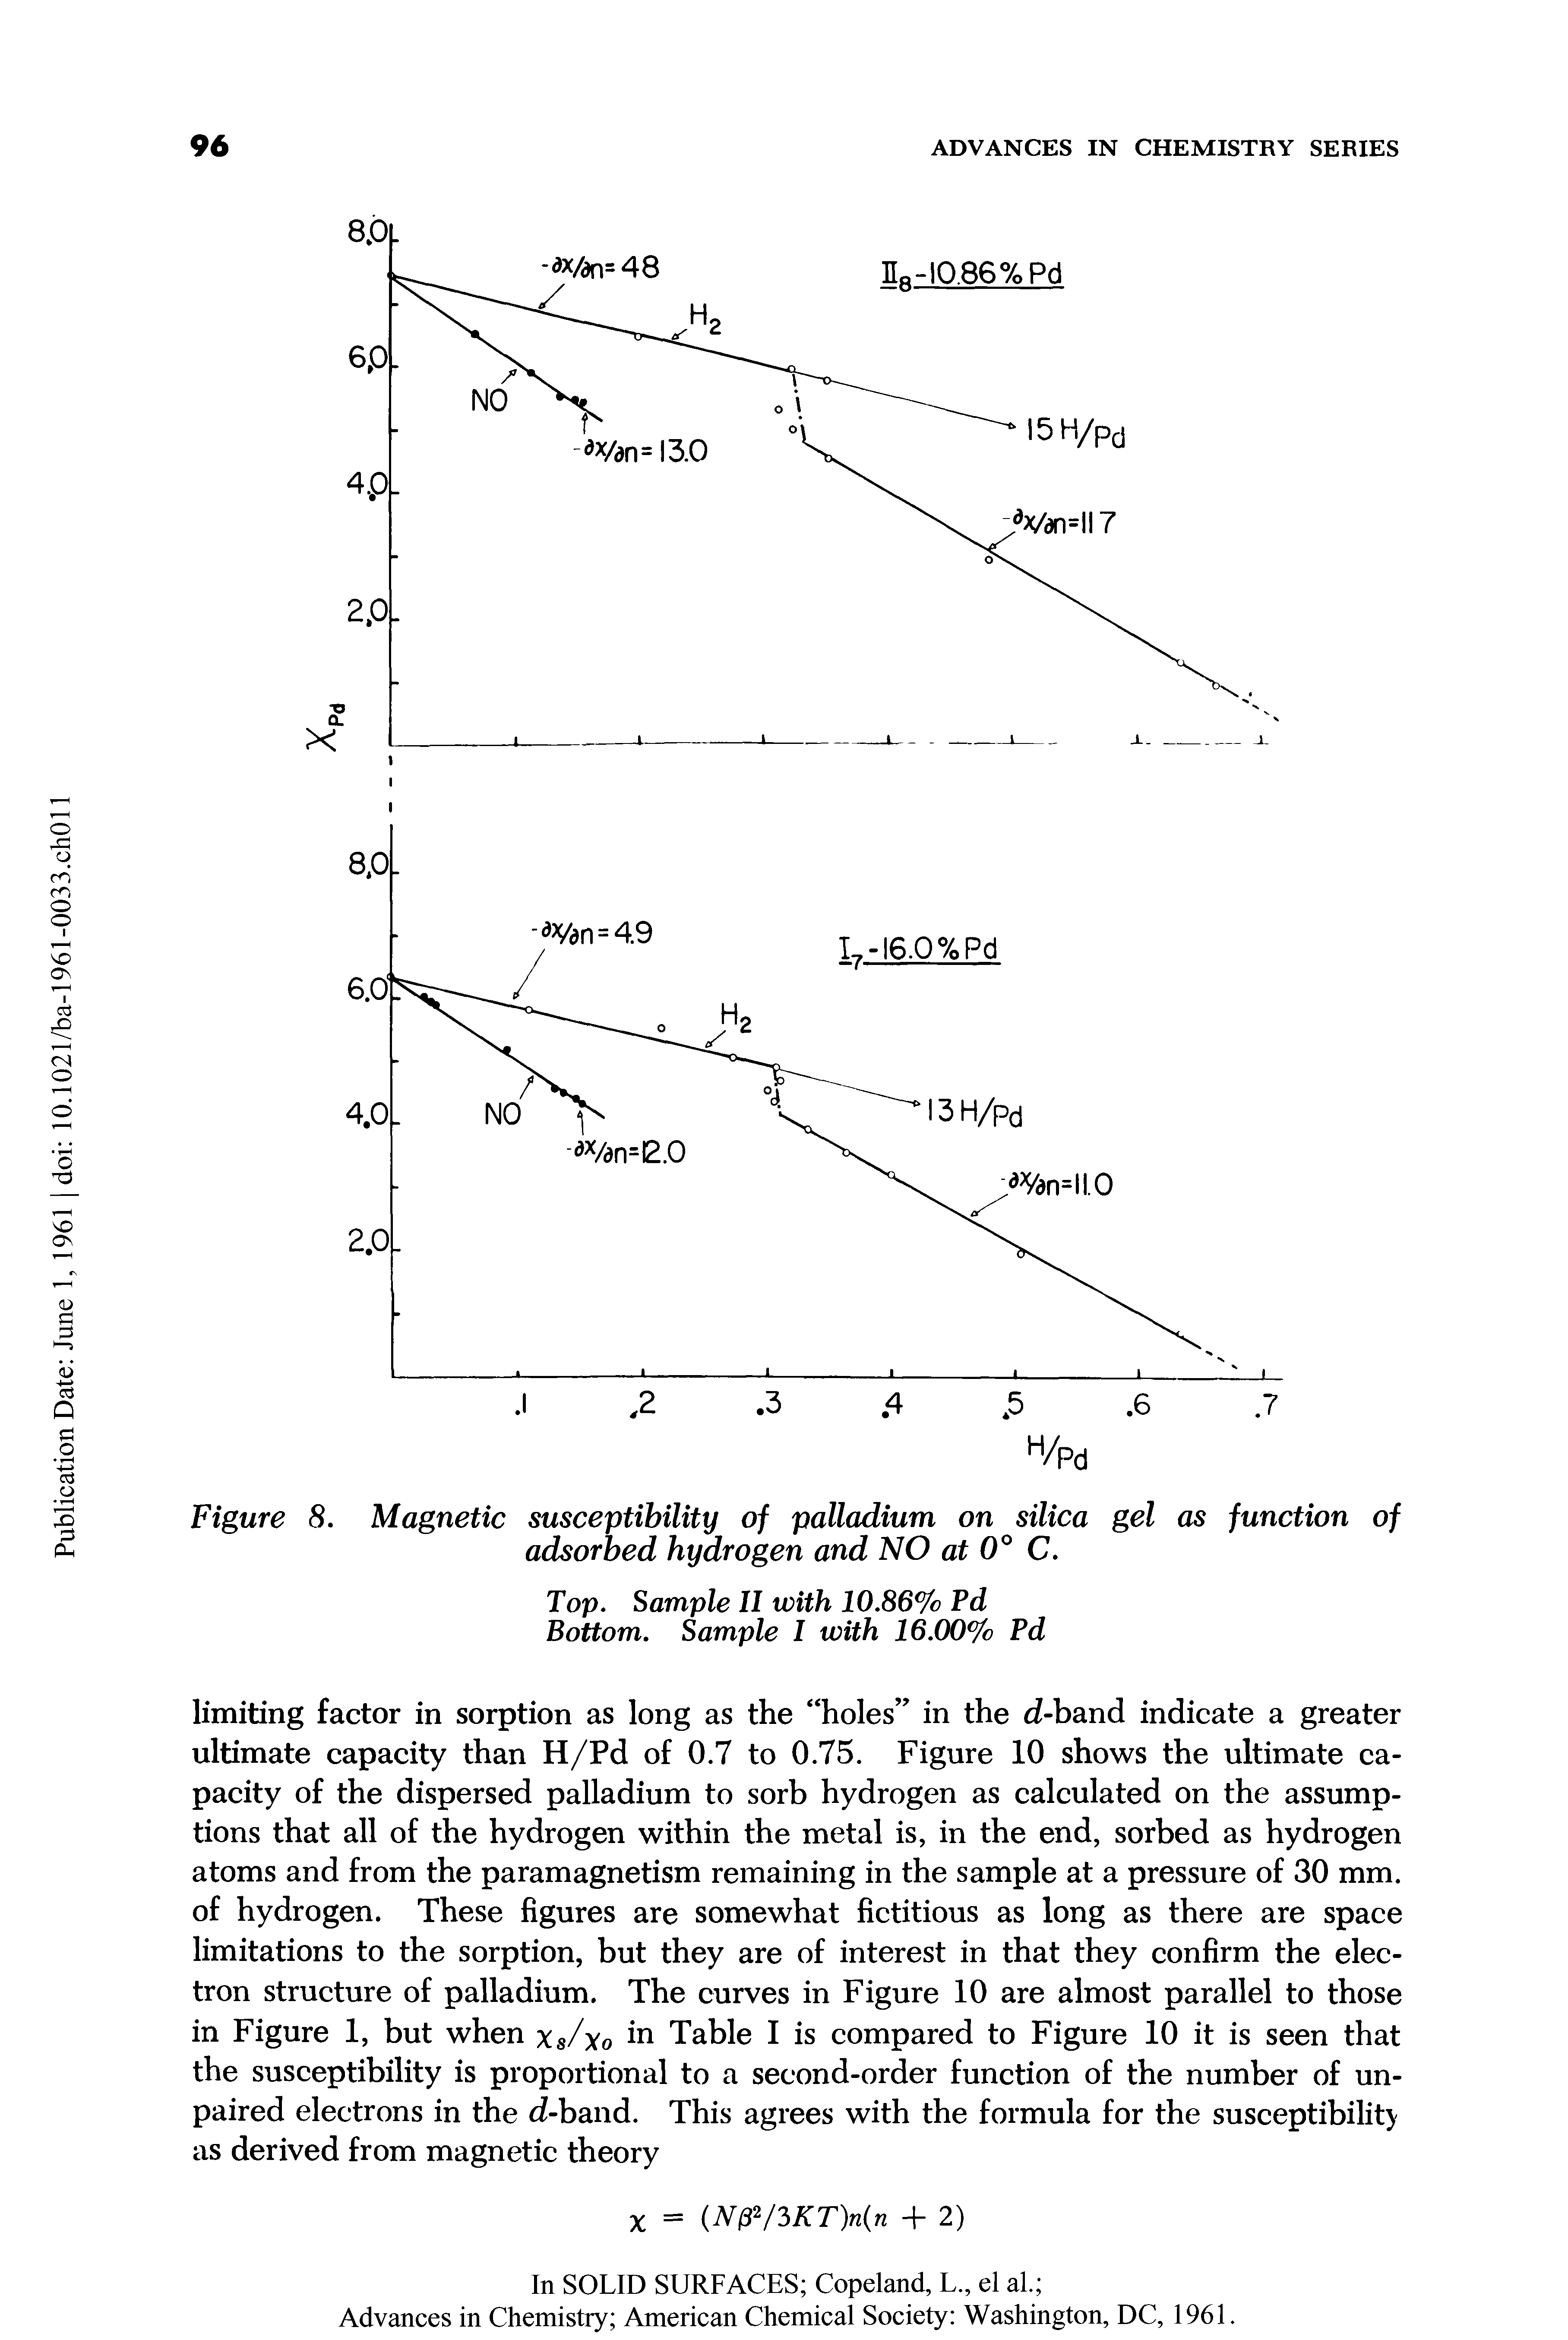 Figure 8. Magnetic susceptibility of palladium on silica gel as function of adsorbed hydrogen and NO at 0° C.